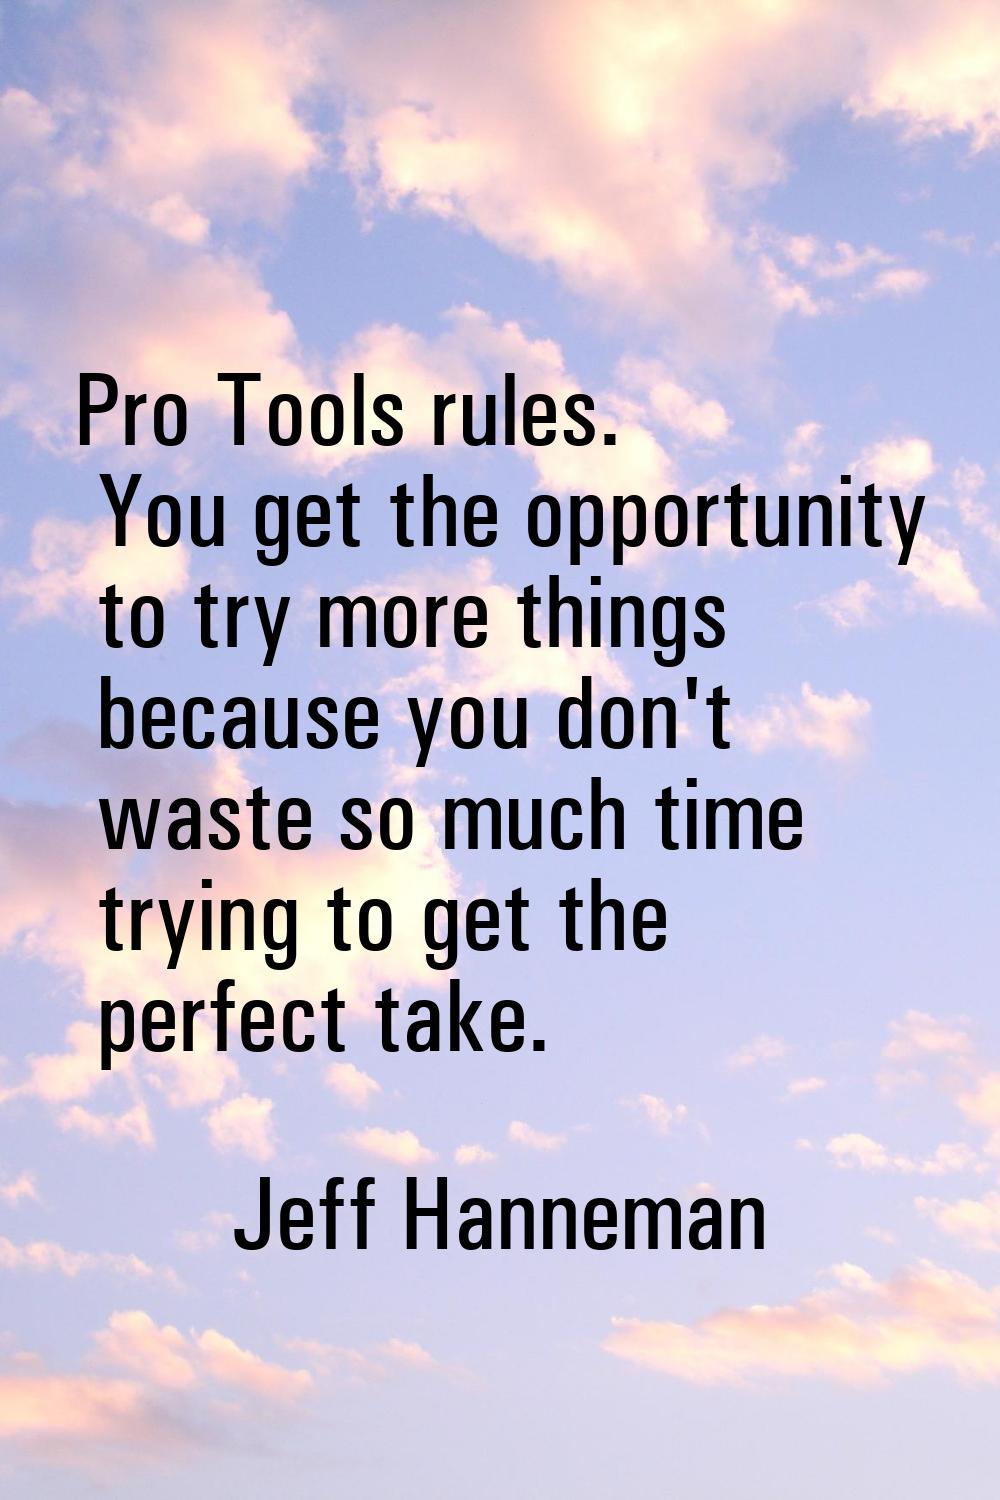 Pro Tools rules. You get the opportunity to try more things because you don't waste so much time tr